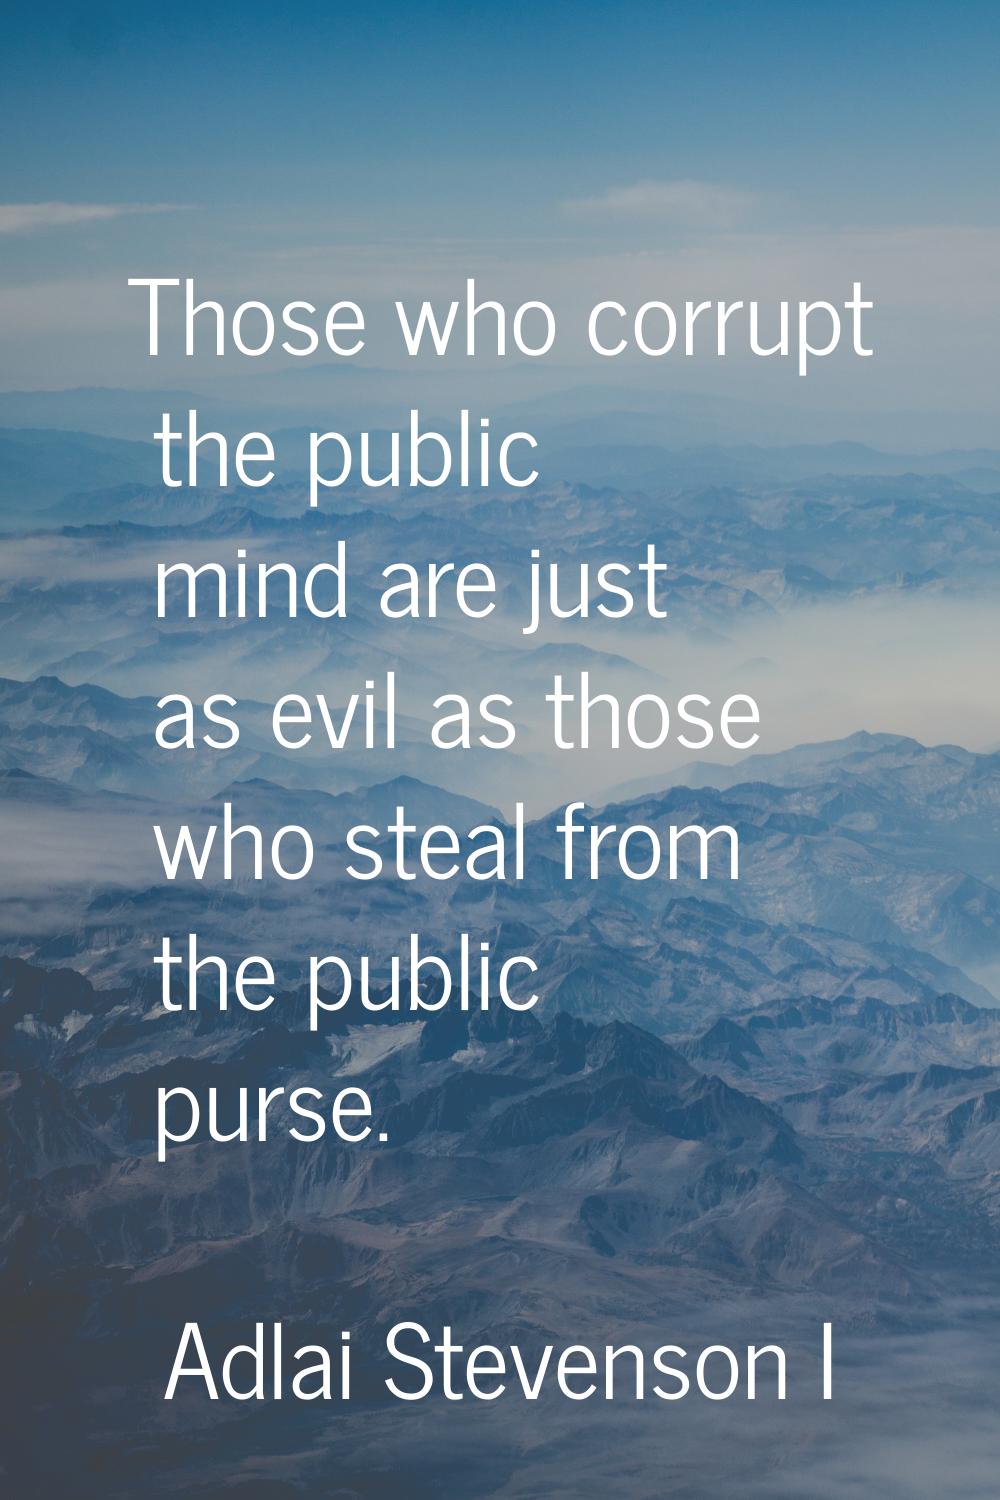 Those who corrupt the public mind are just as evil as those who steal from the public purse.